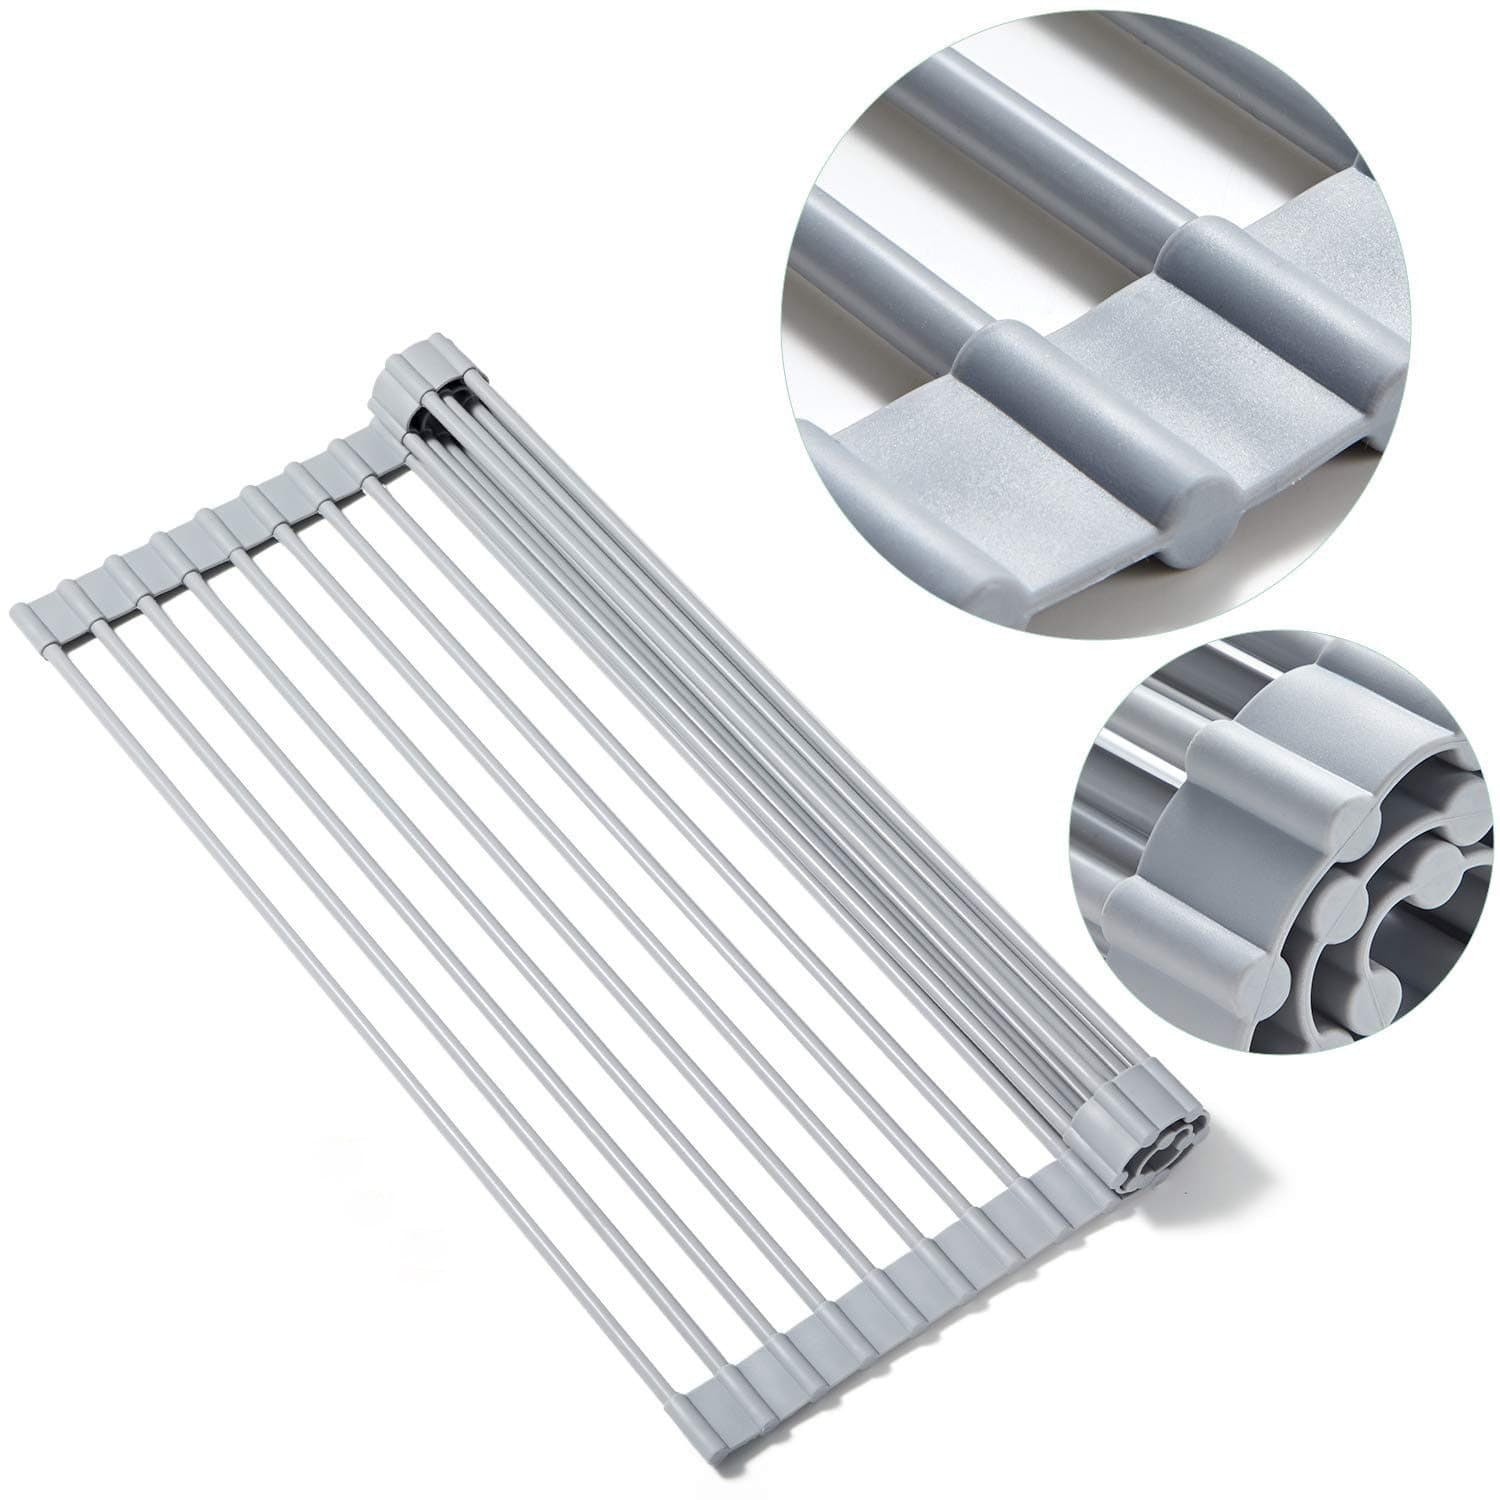 Over the Sink Multipurpose Roll-Up Dish Drying Rack Pan Bottle